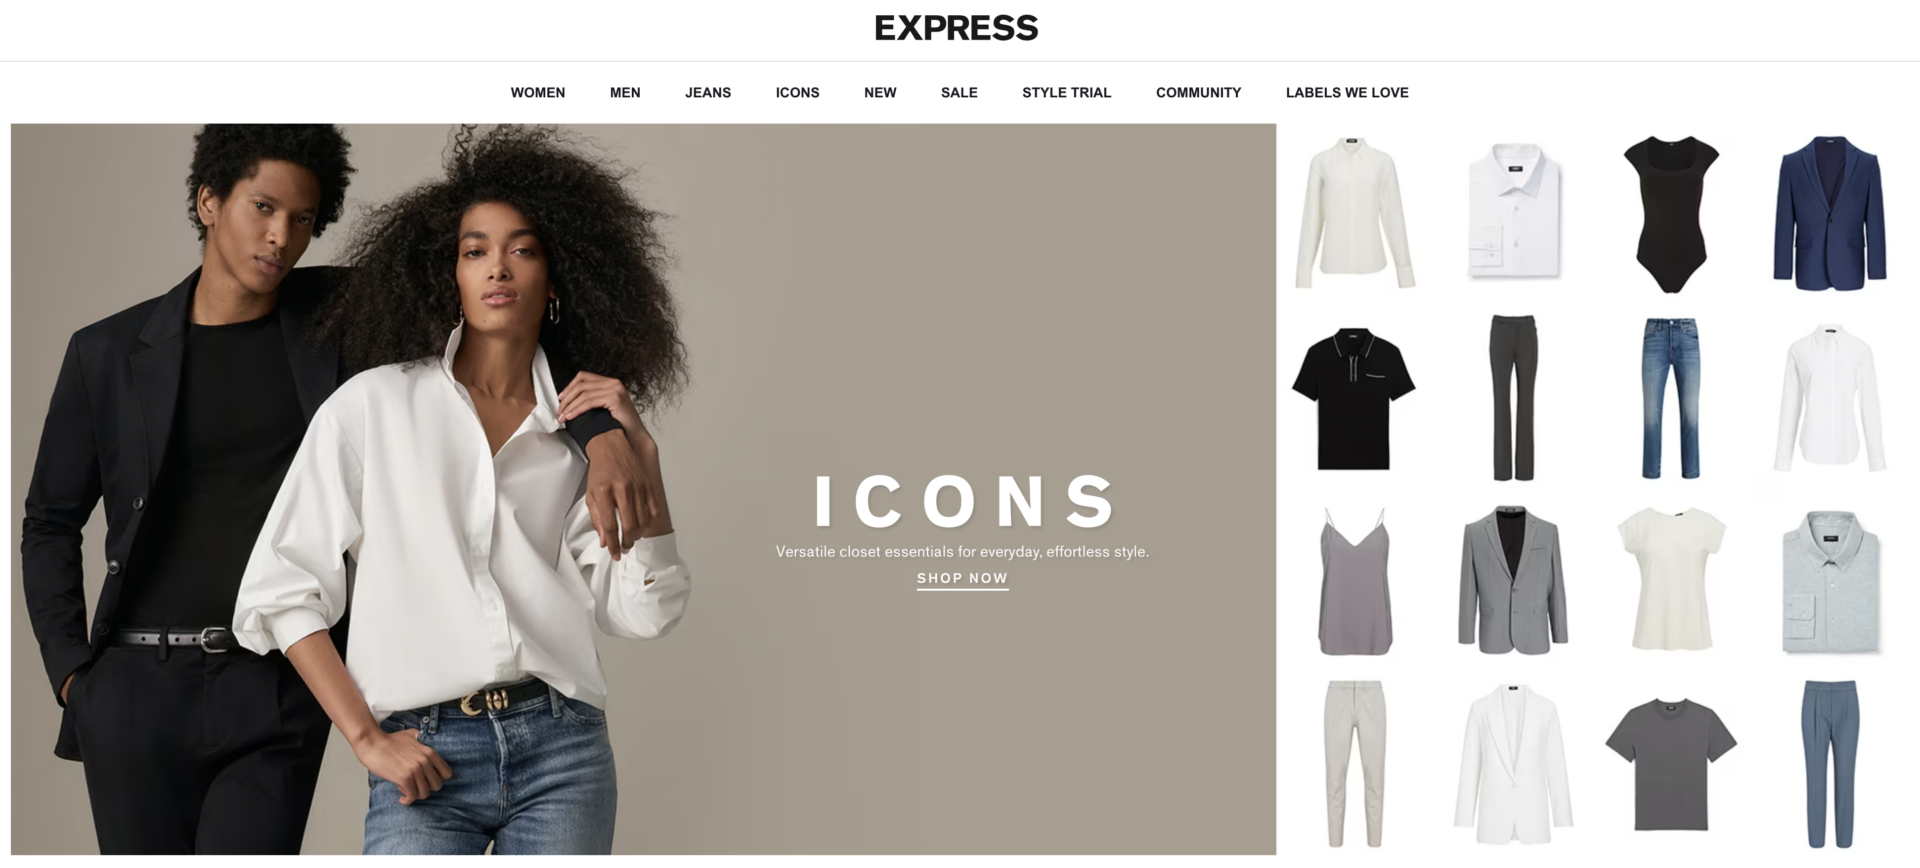 Express - Best Places To Shop Over 40